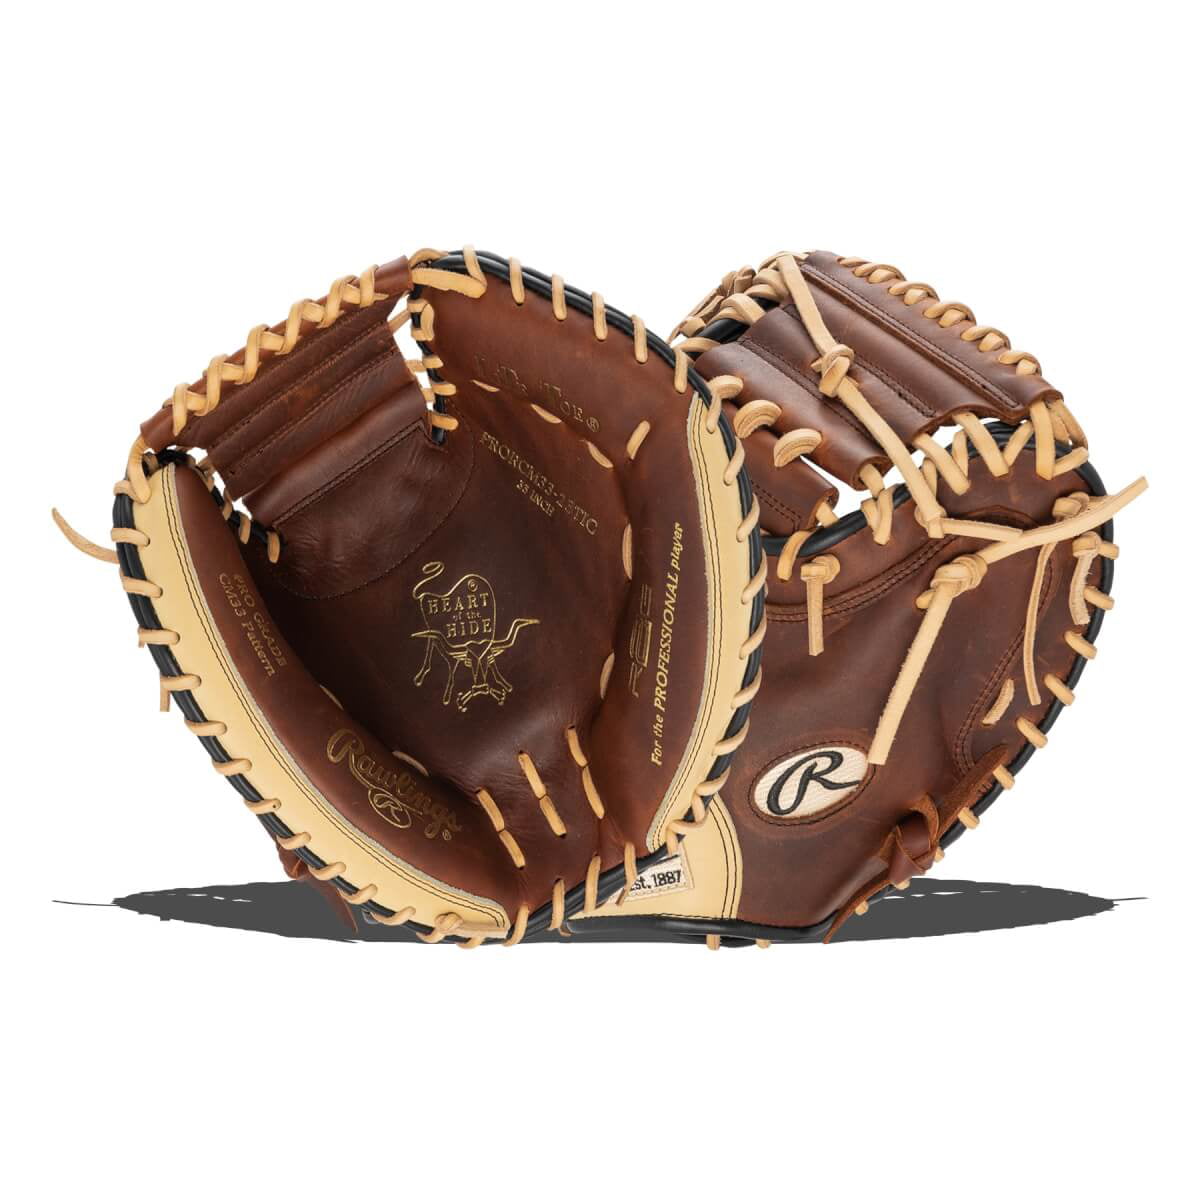 Champro Padded Catcher's Glove A058 for sale online 